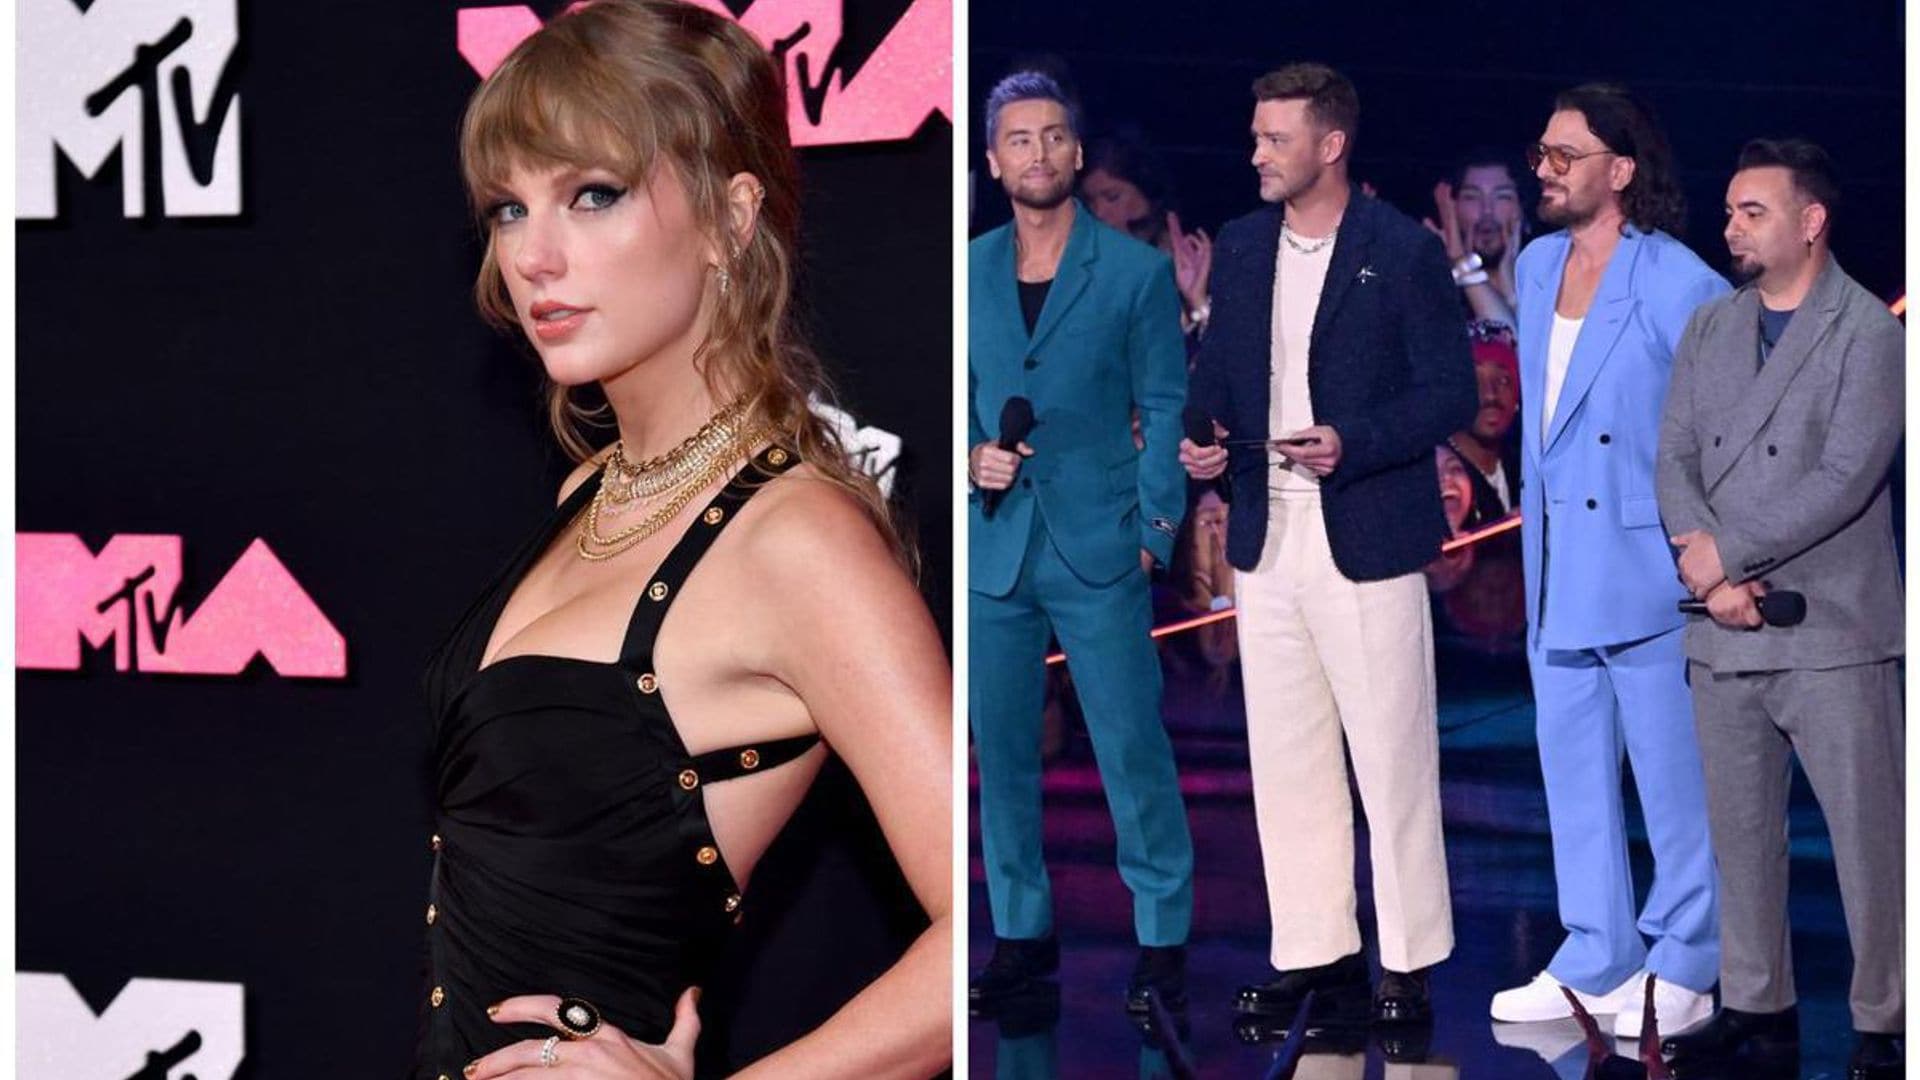 Taylor Swift’s sweet moment with NSYNC at the VMAs: ‘Thank you for the friendship bracelets’